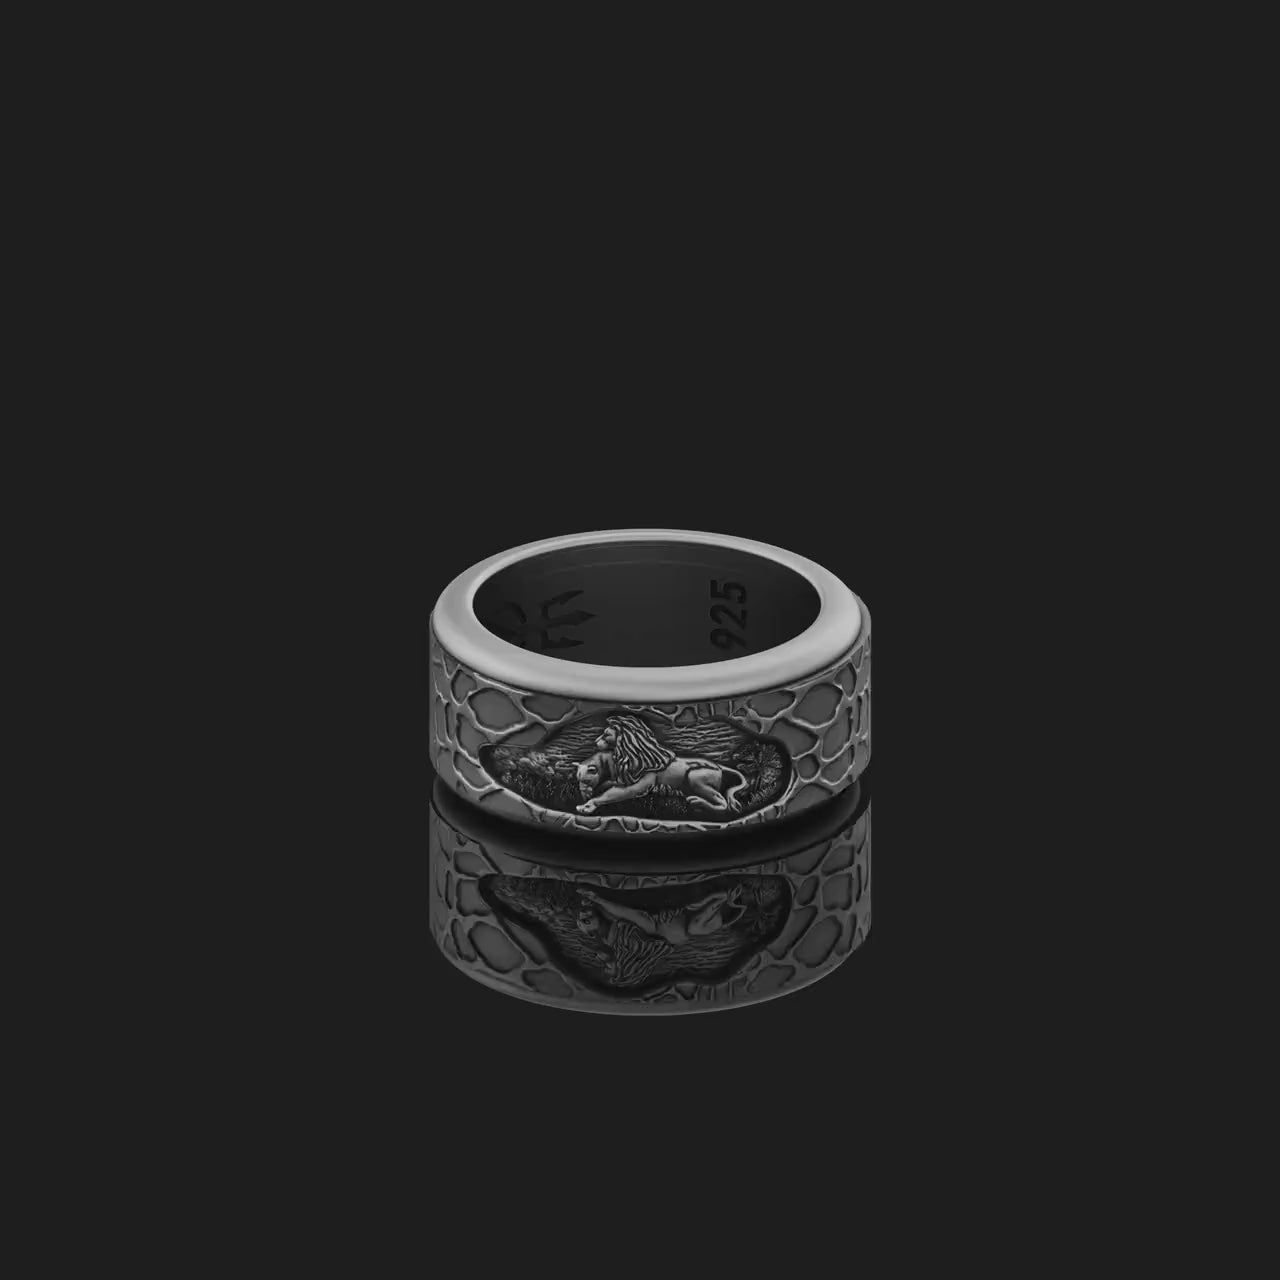 Rotating Hunting Lion Wedding Band, Symbol of Strength & Royalty, Unique King of Jungle Inspired Bridal Jewelry